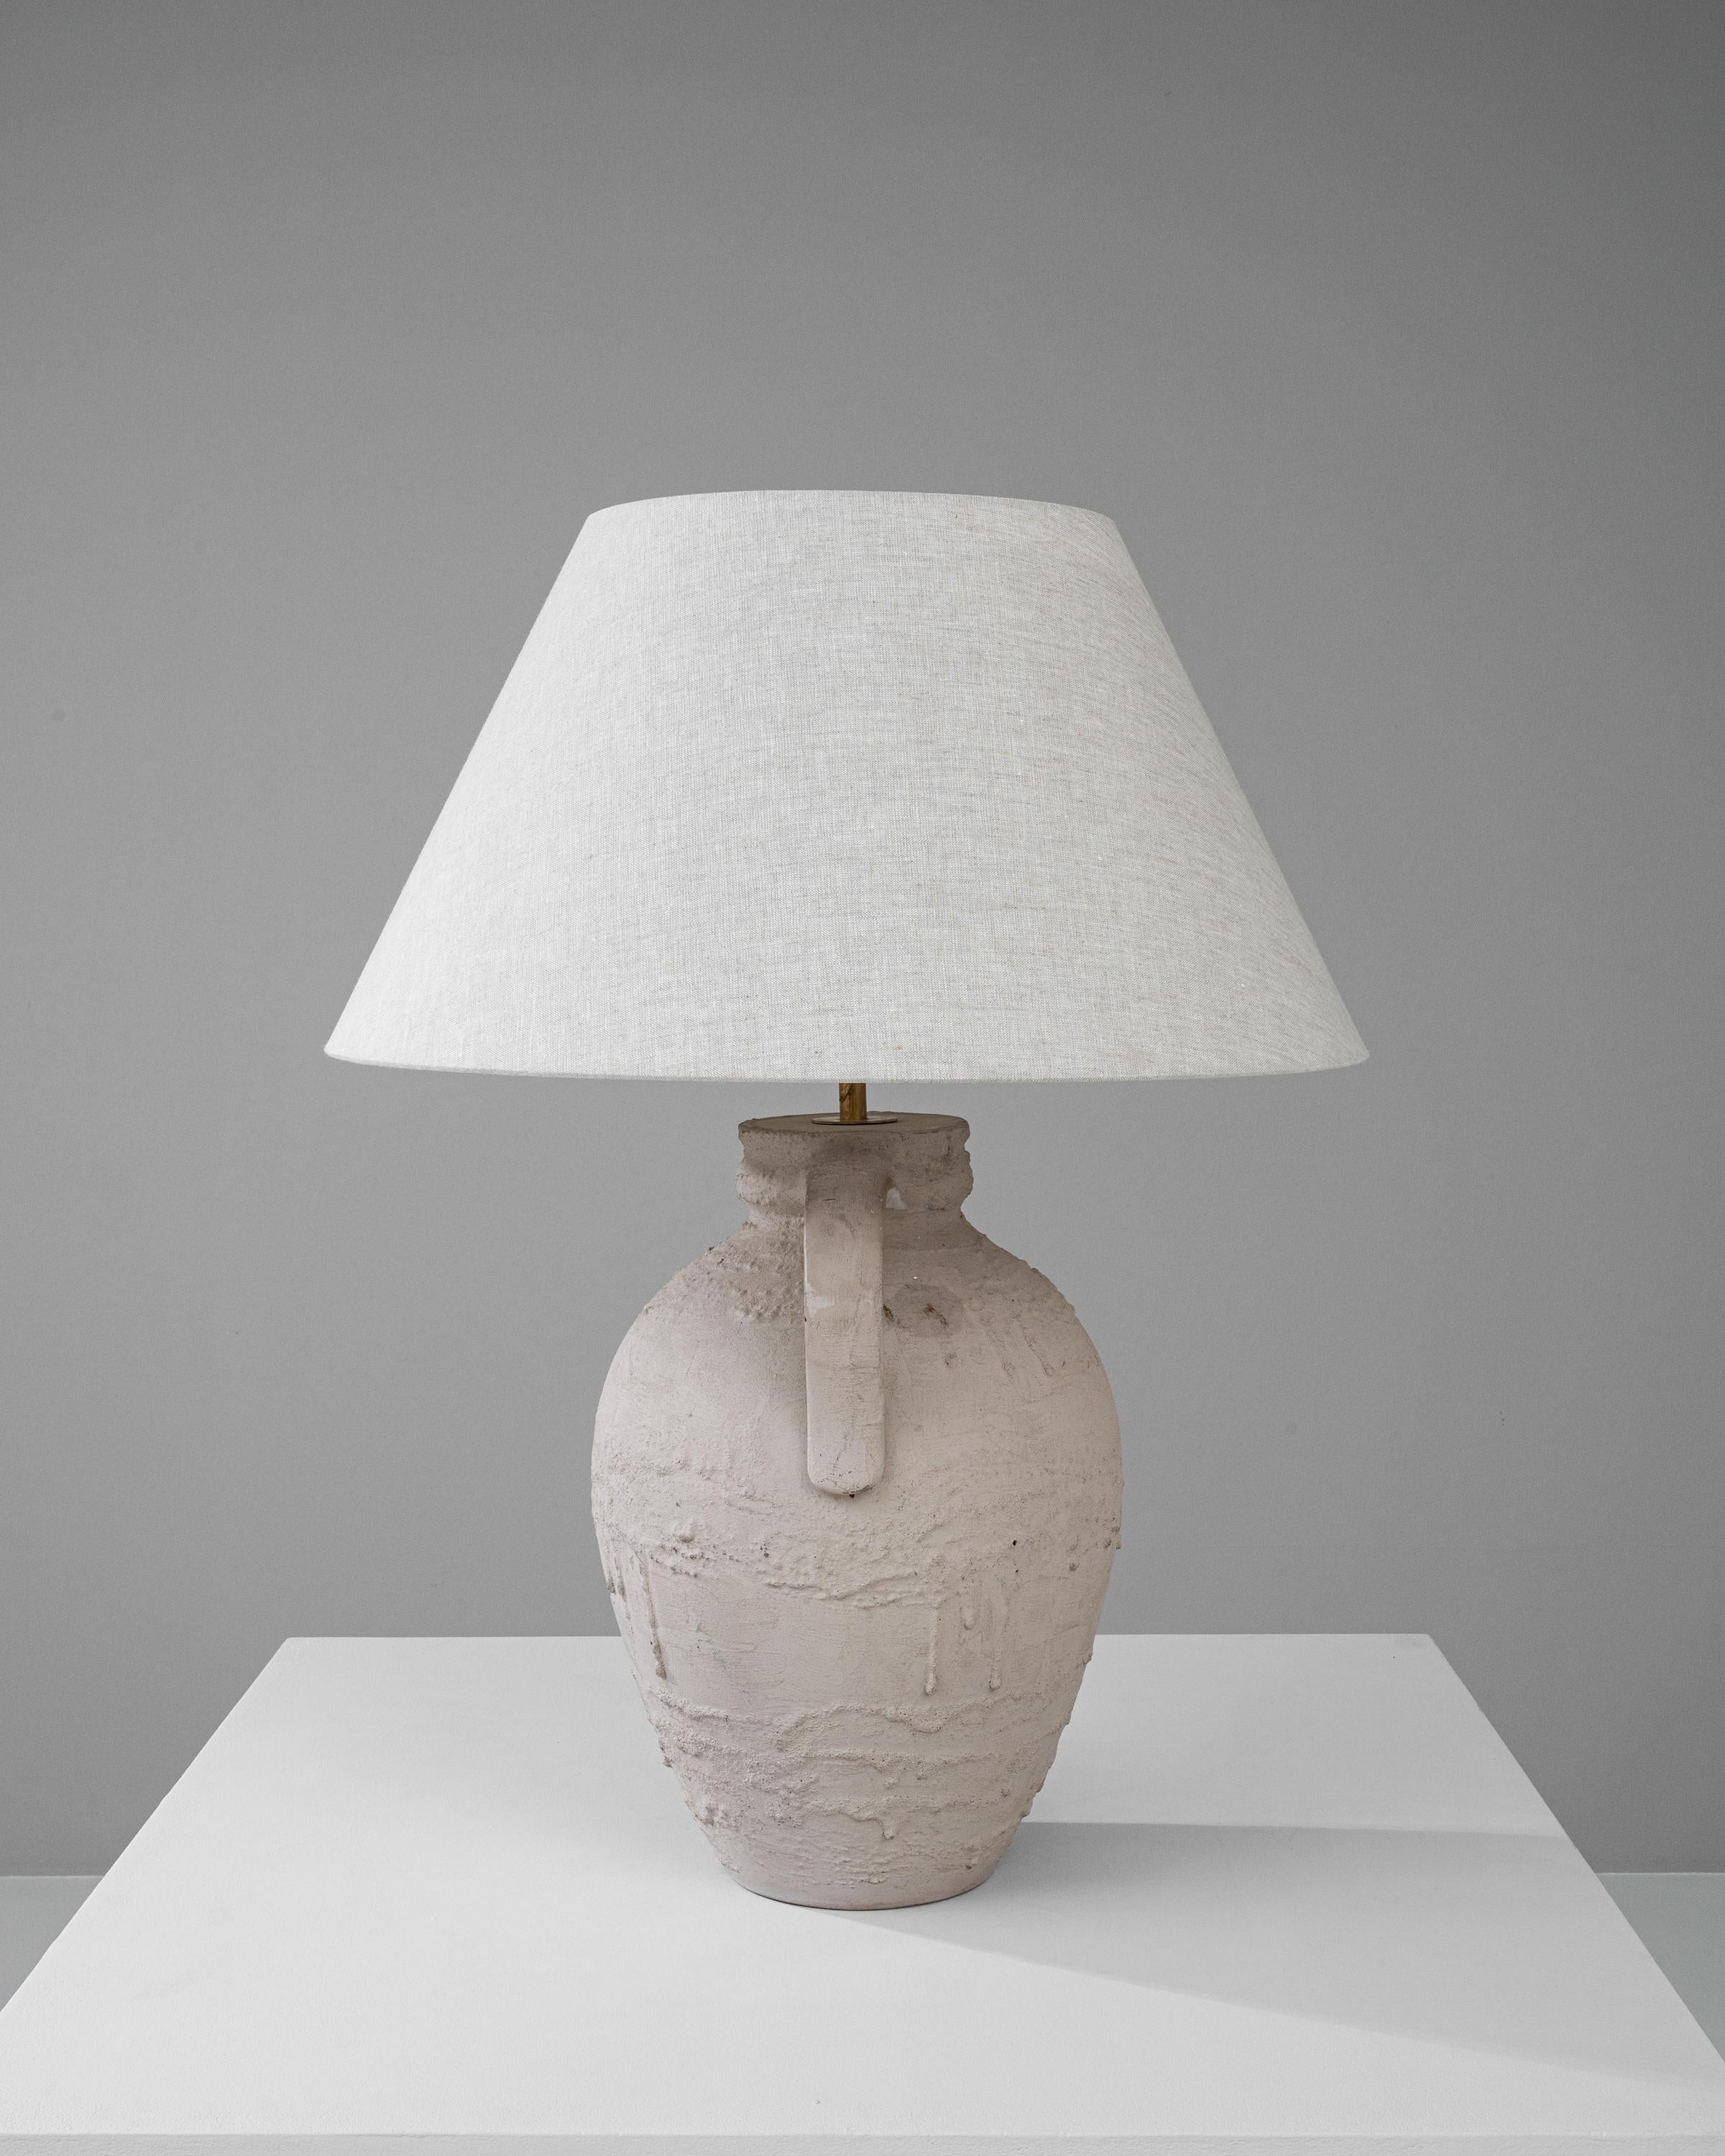 This 20th Century German Ceramic Table Lamp offers a pure and elemental aesthetic that evokes a sense of serene, rustic charm. Its stout, textured base is reminiscent of ancient pottery, carrying the marks and nuances of traditional craftsmanship.